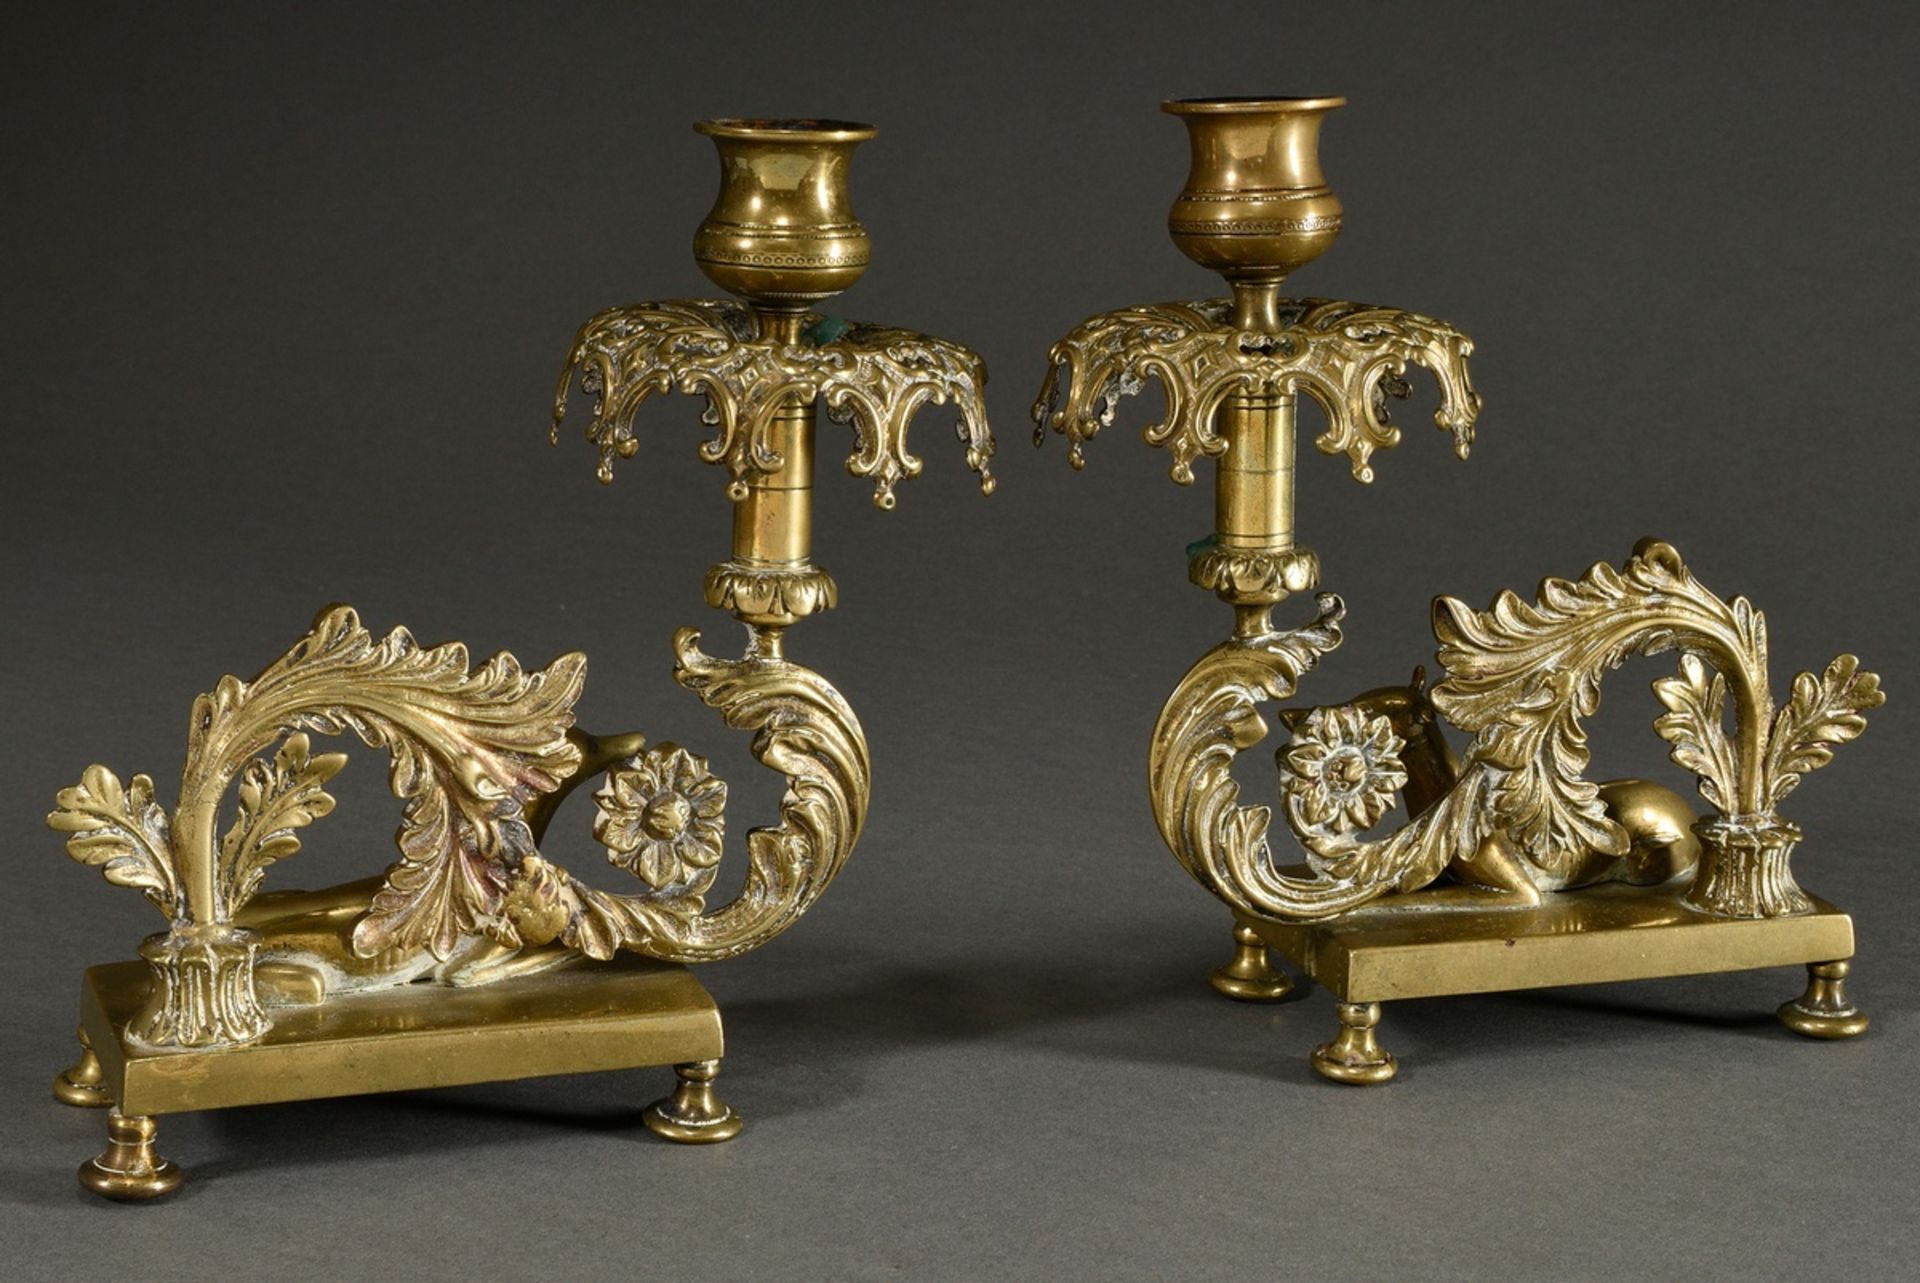 Pair of historicism yellow cast iron candlesticks with sculptural figures ‘Lying greyhounds’ and ve - Image 3 of 7